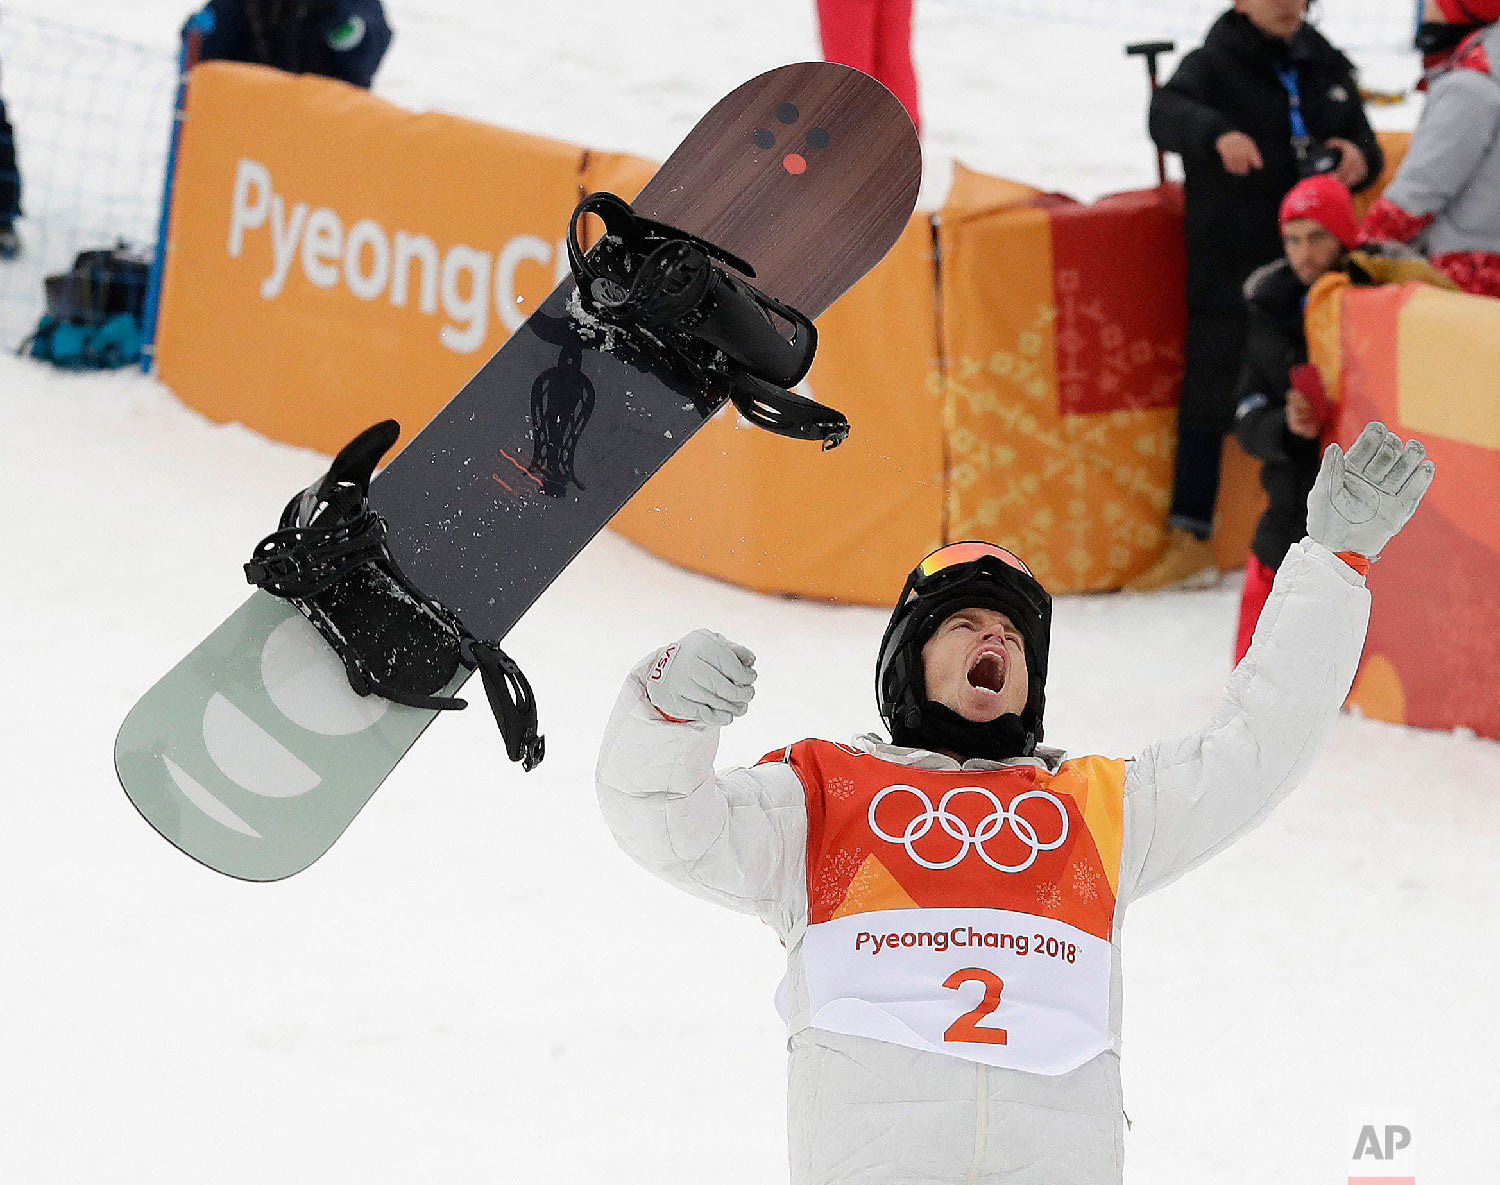  Shaun White, of the United States, celebrates winning gold after his run during the men's halfpipe finals at the 2018 Winter Olympics in Pyeongchang, South Korea, on Feb. 14, 2018. (AP Photo/Gregory Bull) 